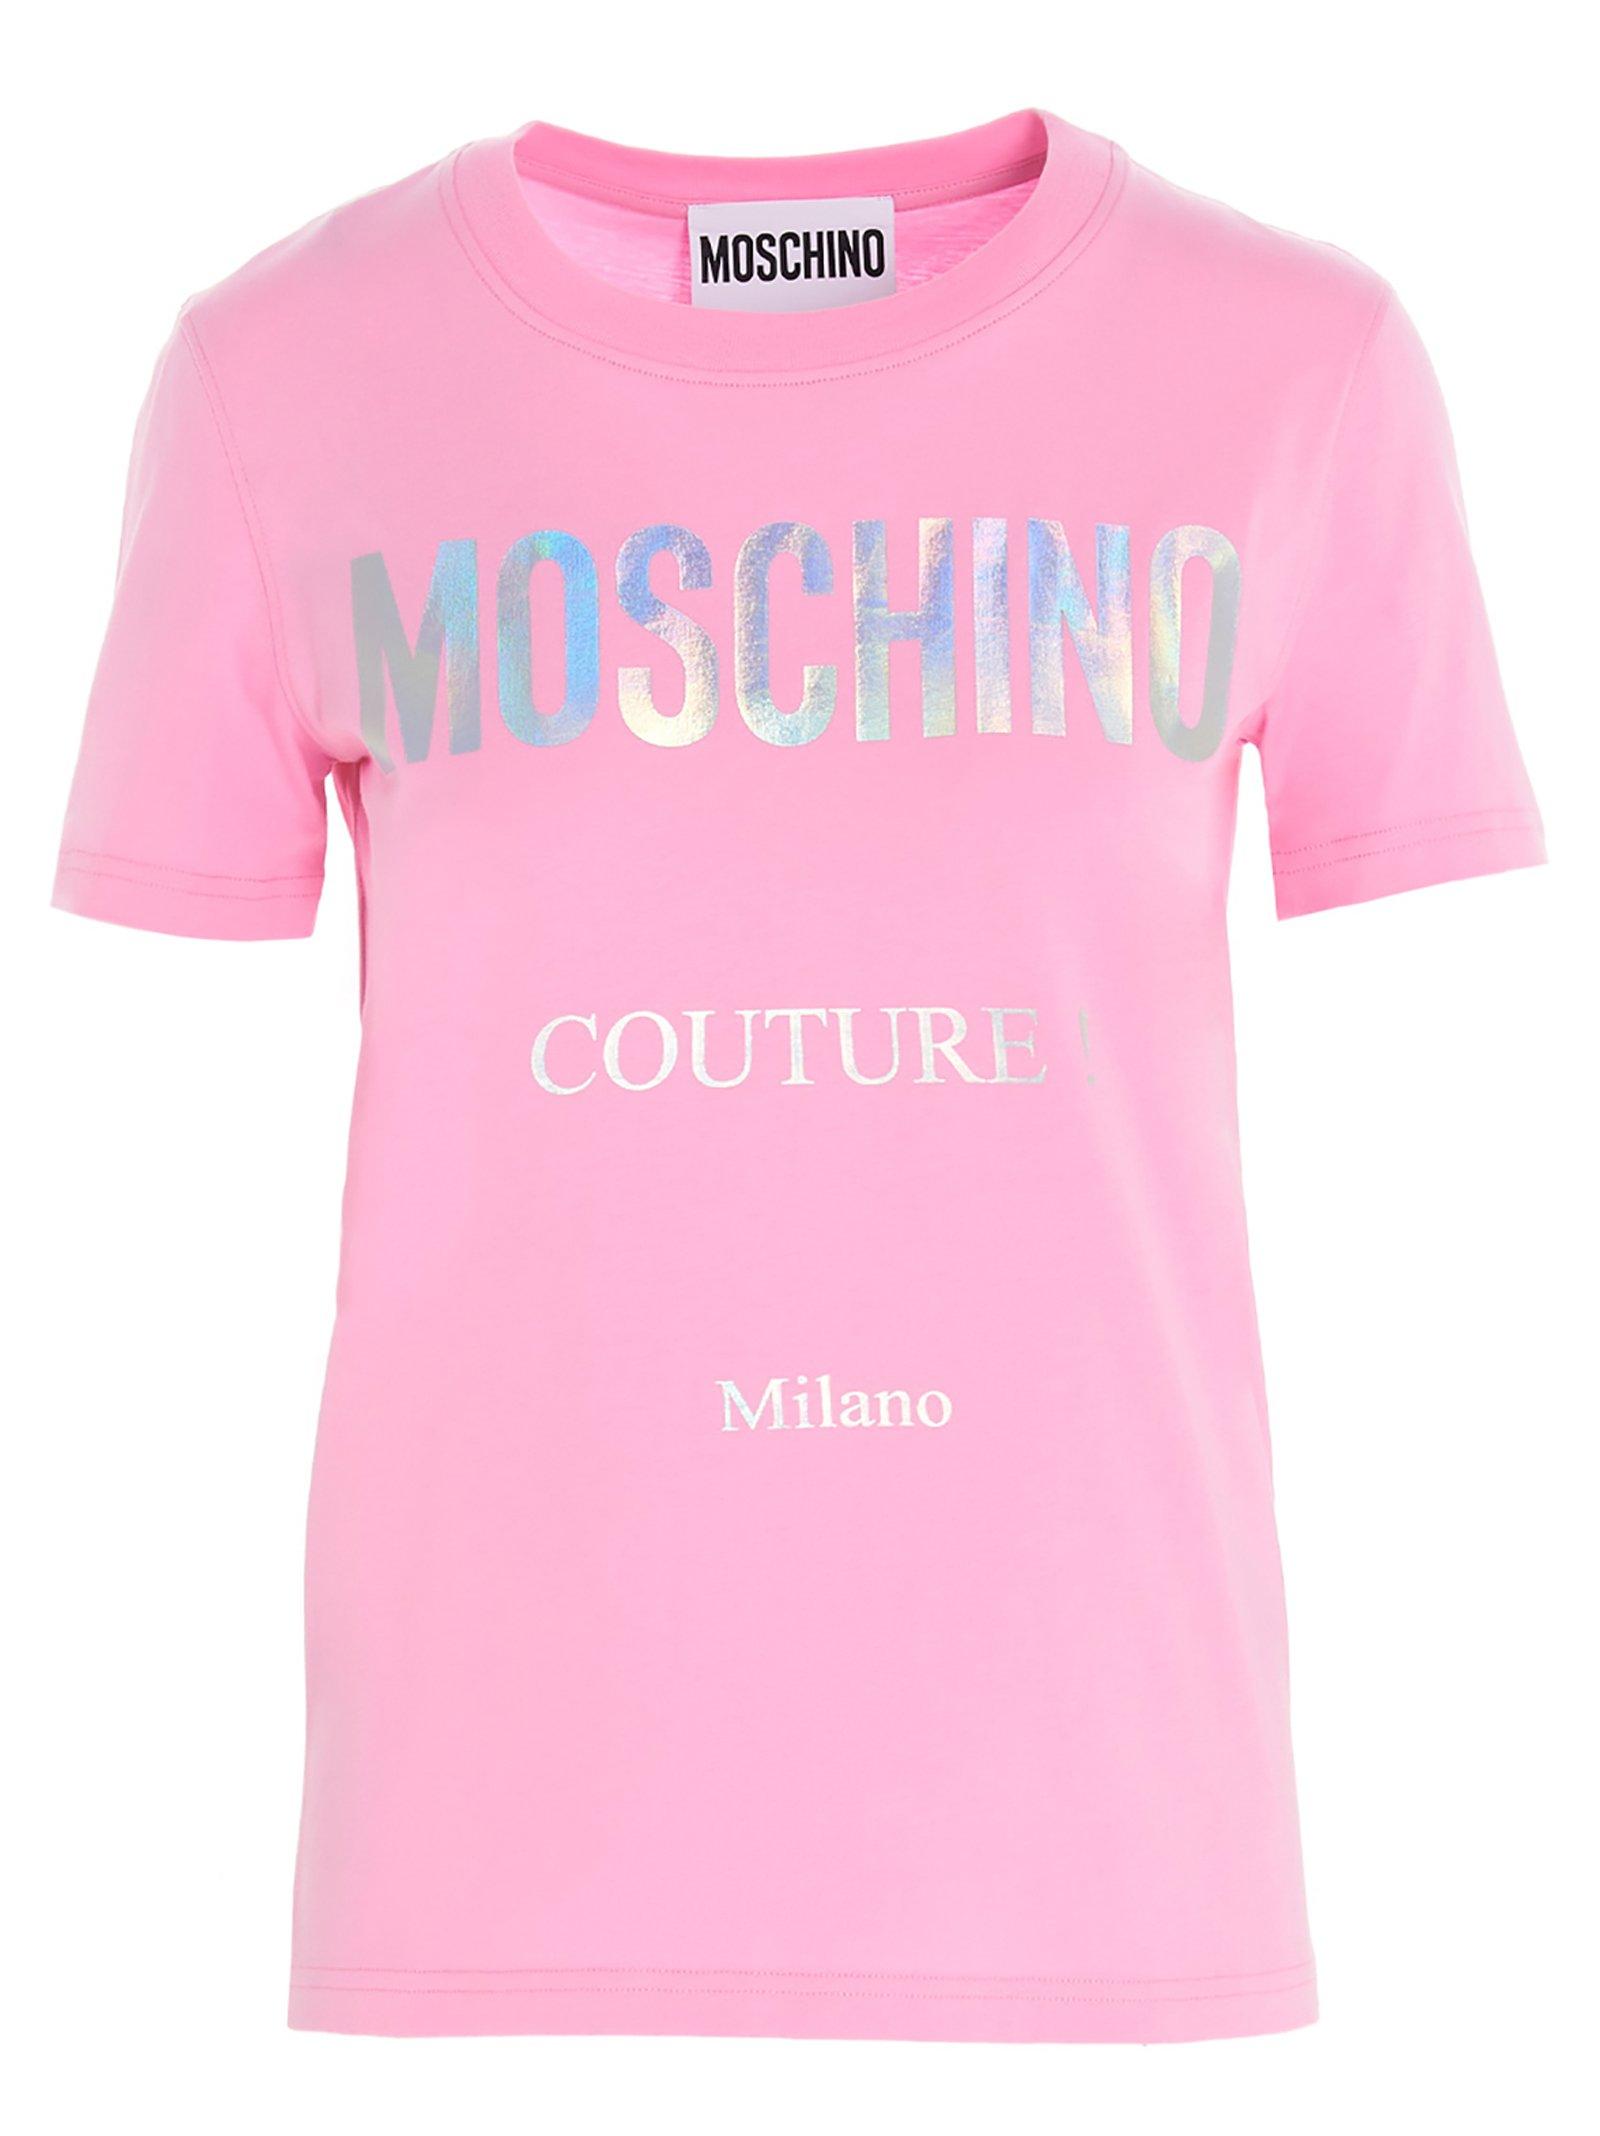 Moschino Cotton Logo Printed T-shirt in Pink - Lyst